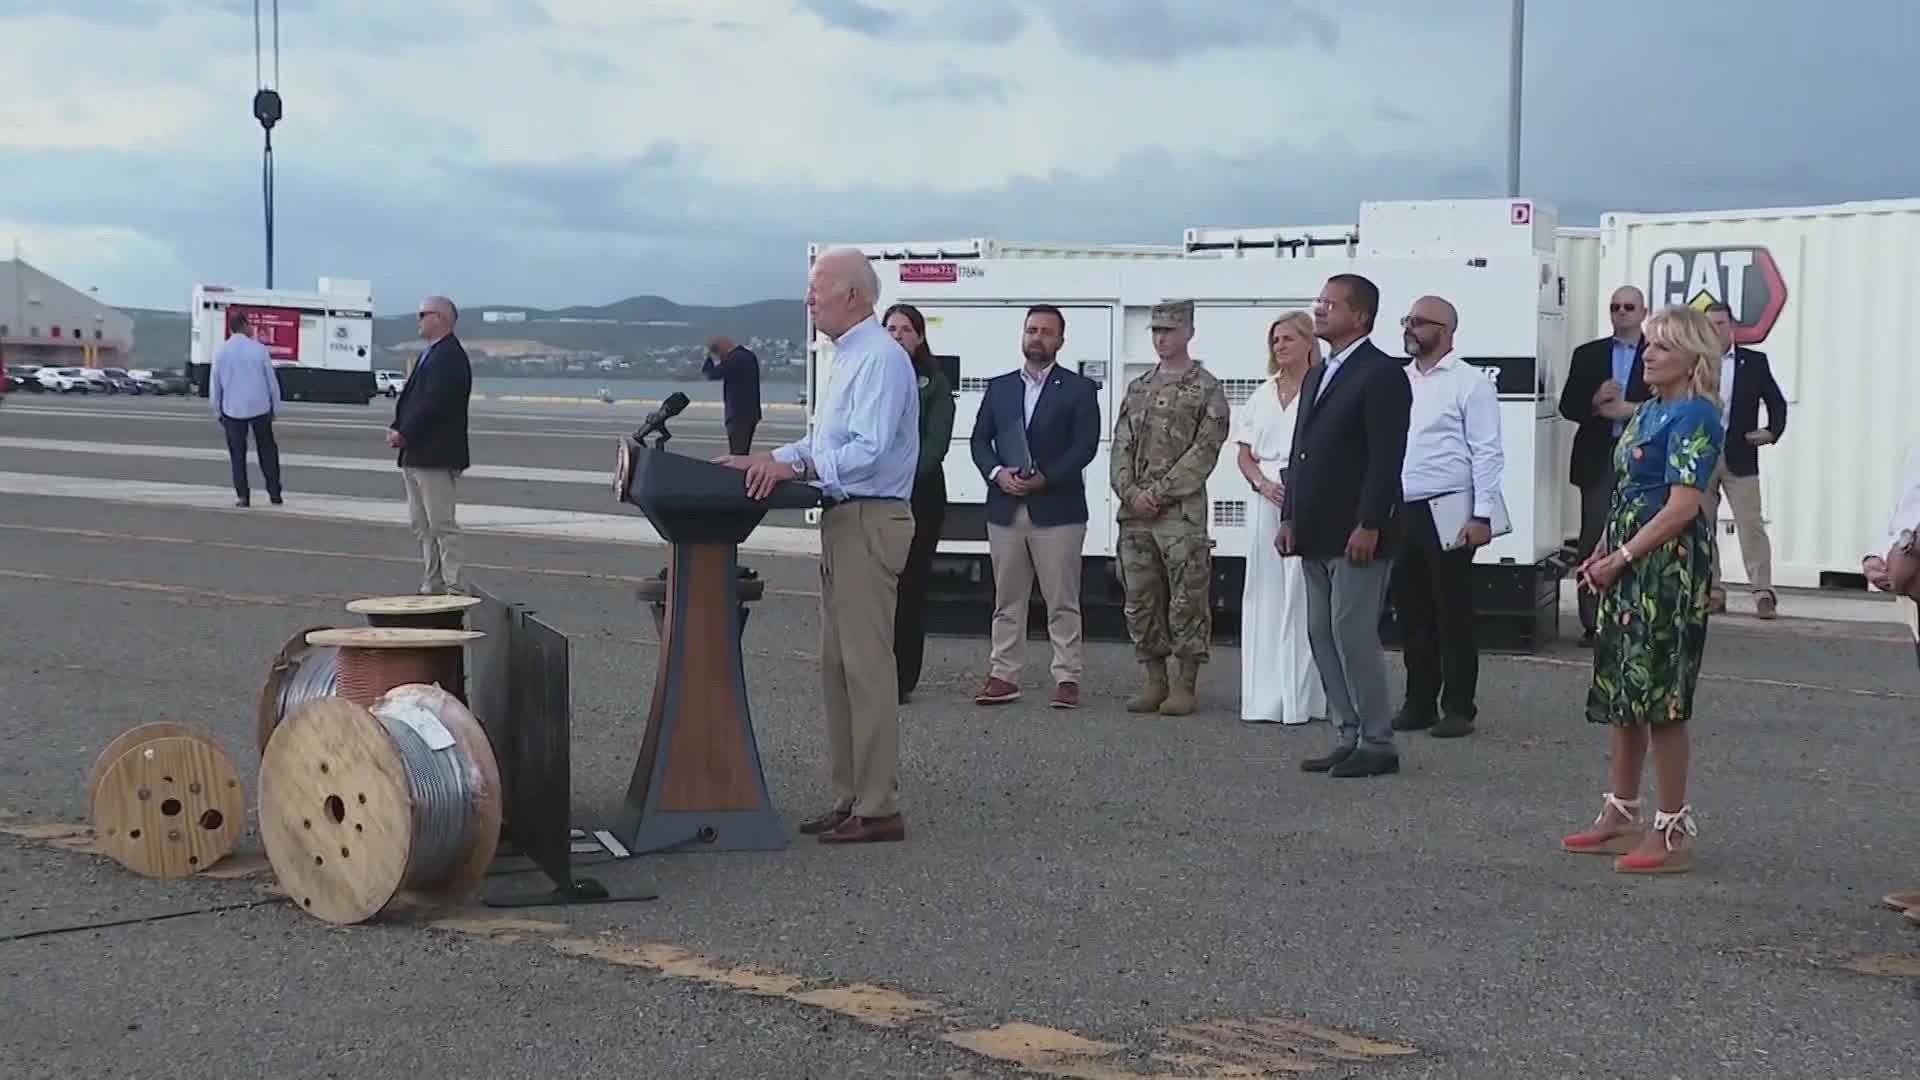 President Biden says Puerto Rico will get $60 million as part of an infrastructure law to protect from future storms.